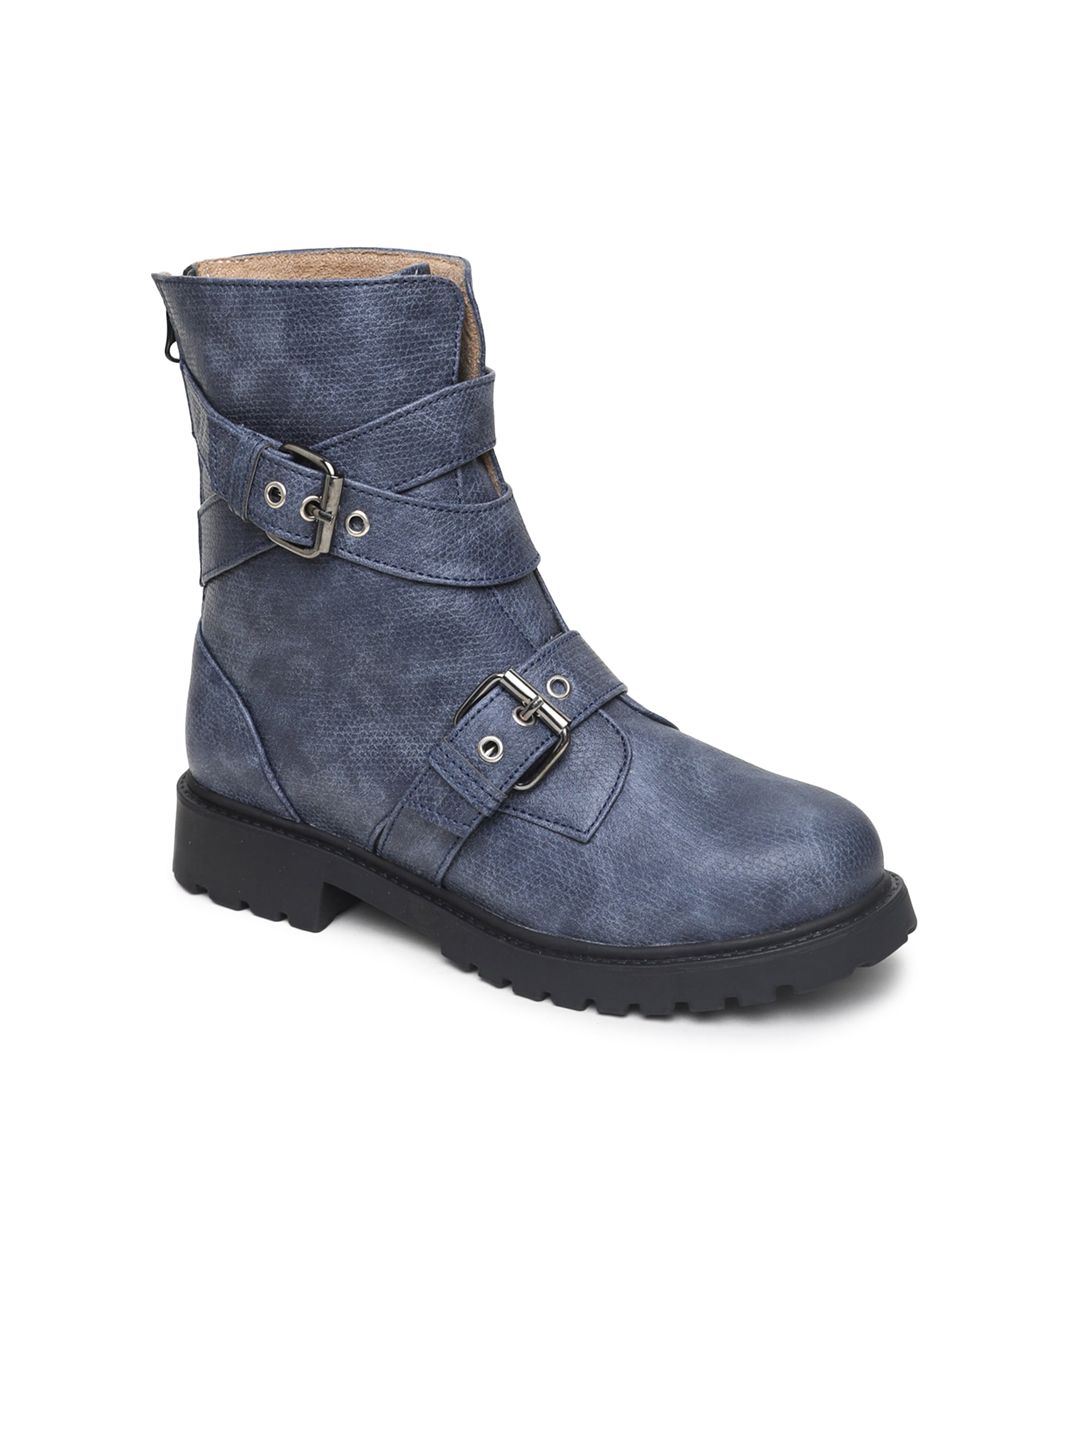 VALIOSAA Navy Blue High-Top Block Heeled Boots with Buckles Price in India